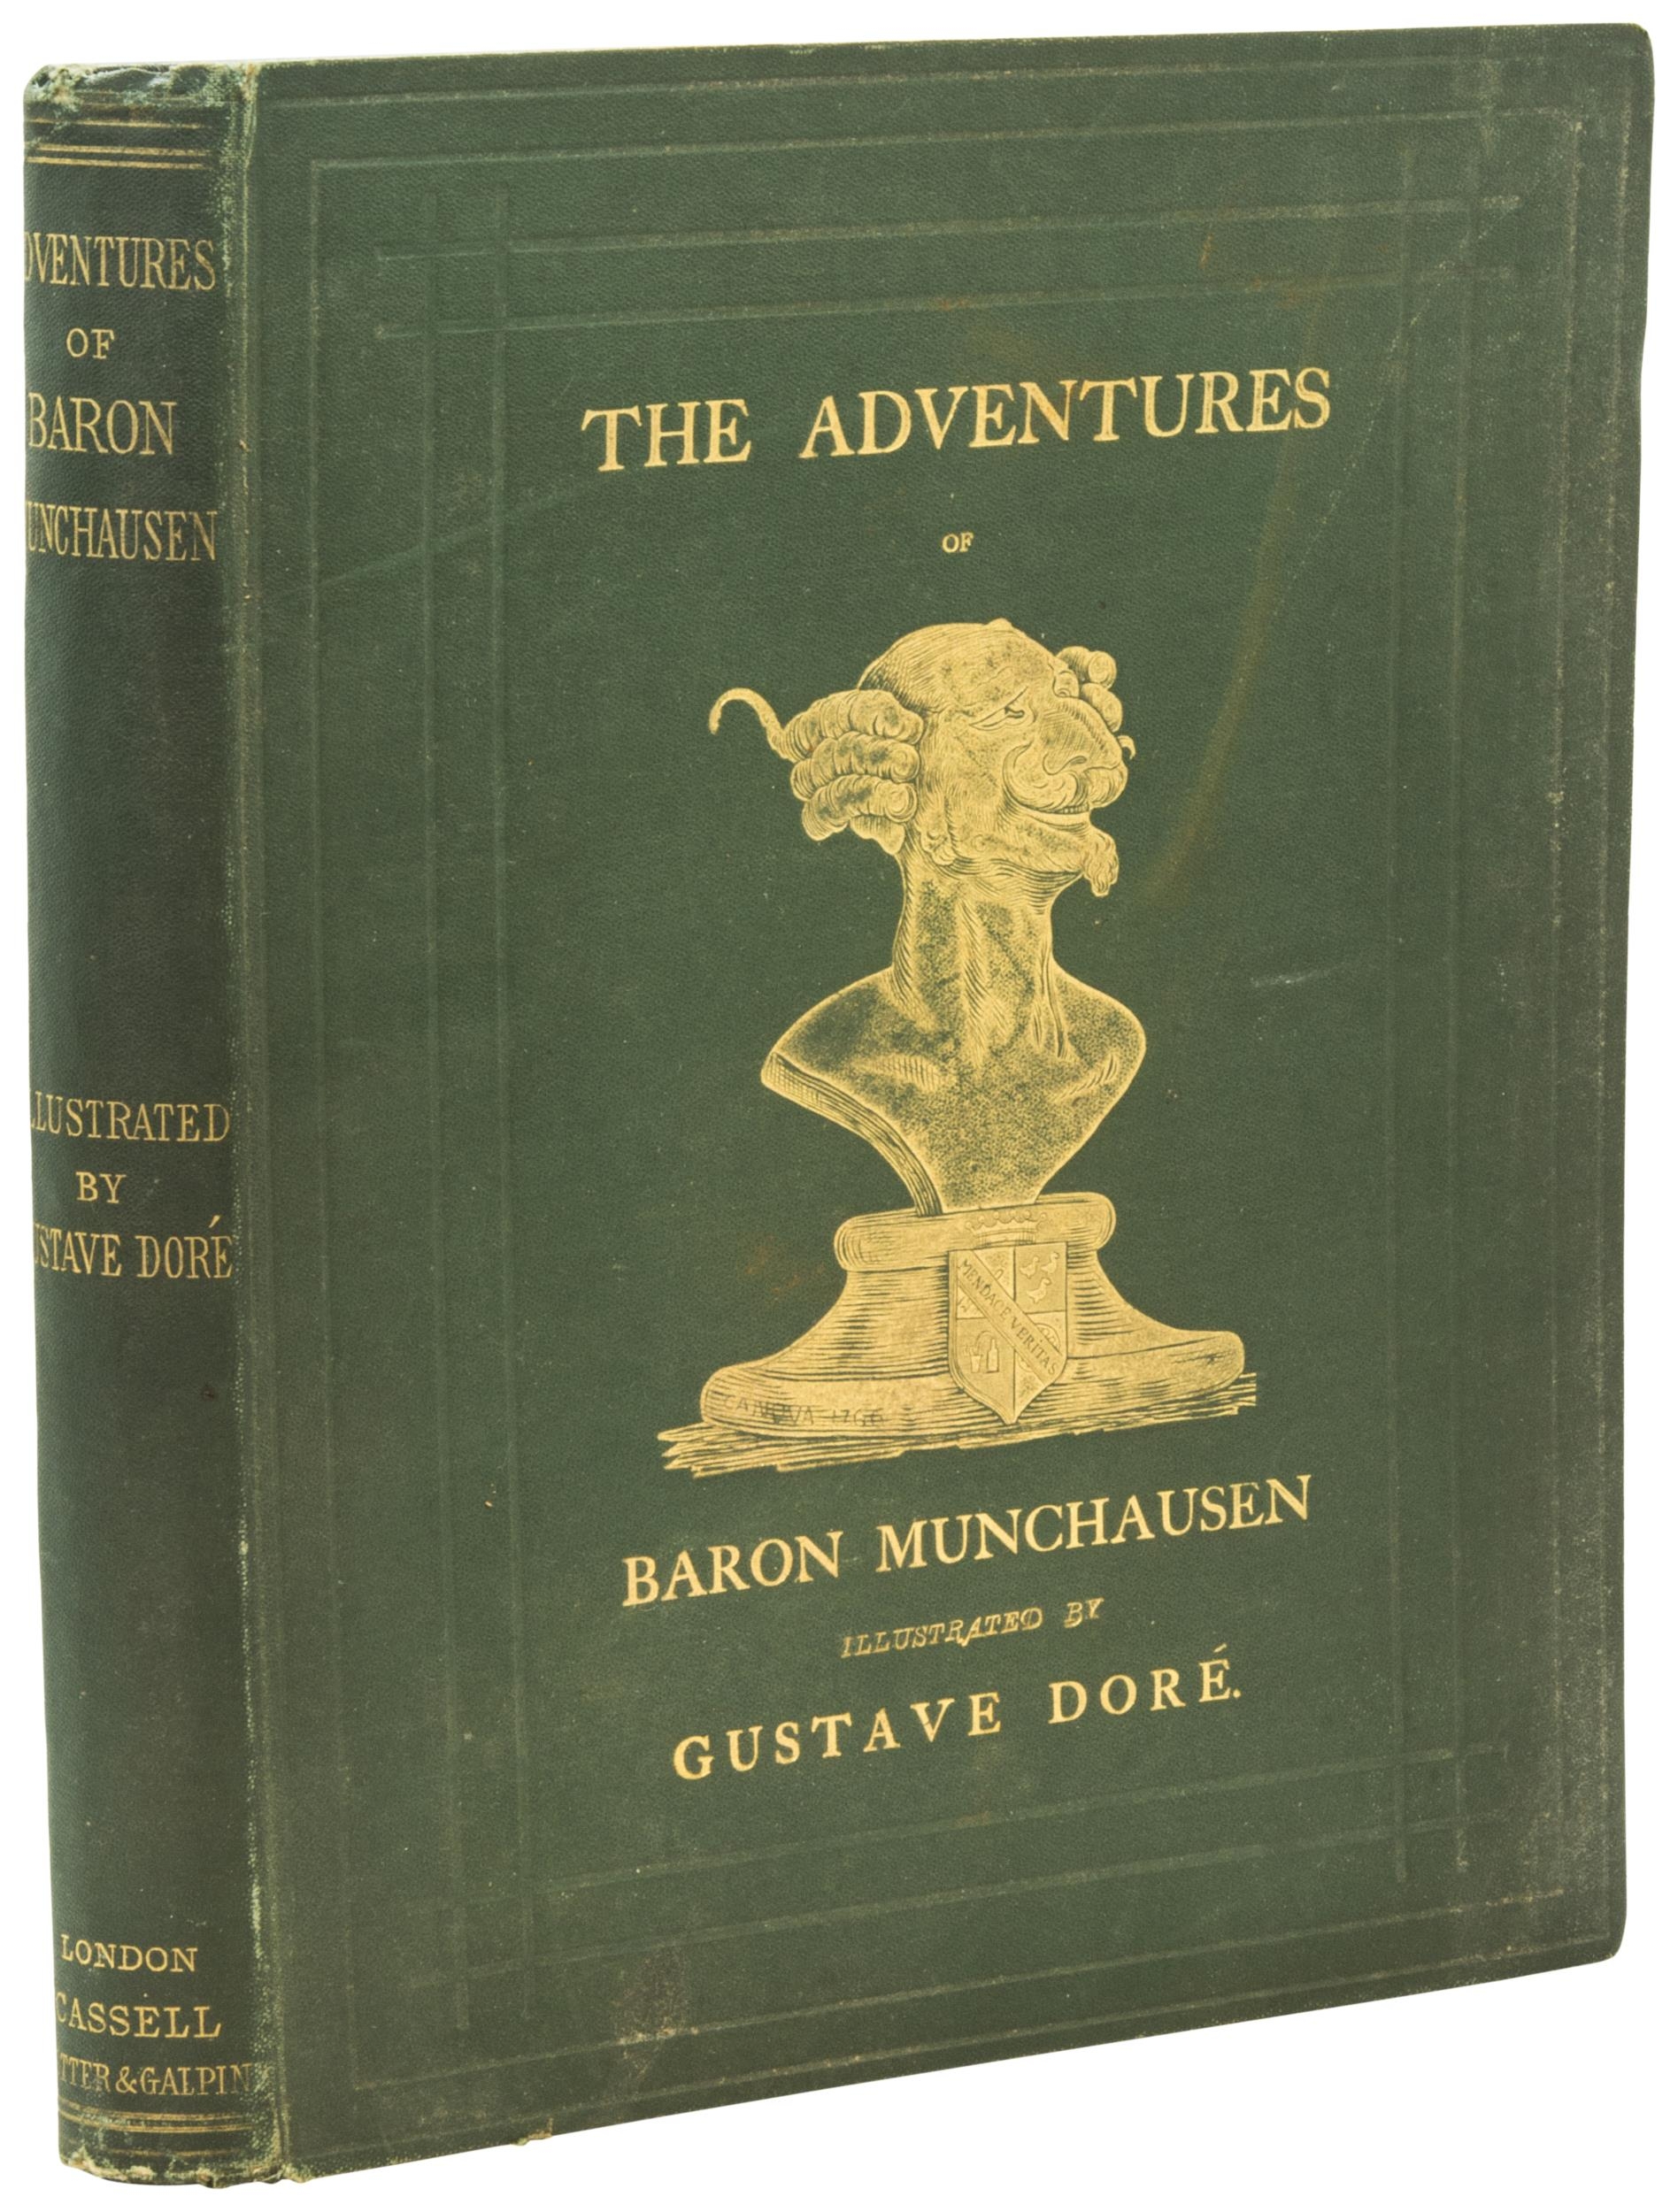 DORE (GUSTAVE) THE ADVENTURES OF BARON MUNCHAUSEN, numerous plates and illusts. 4to. original